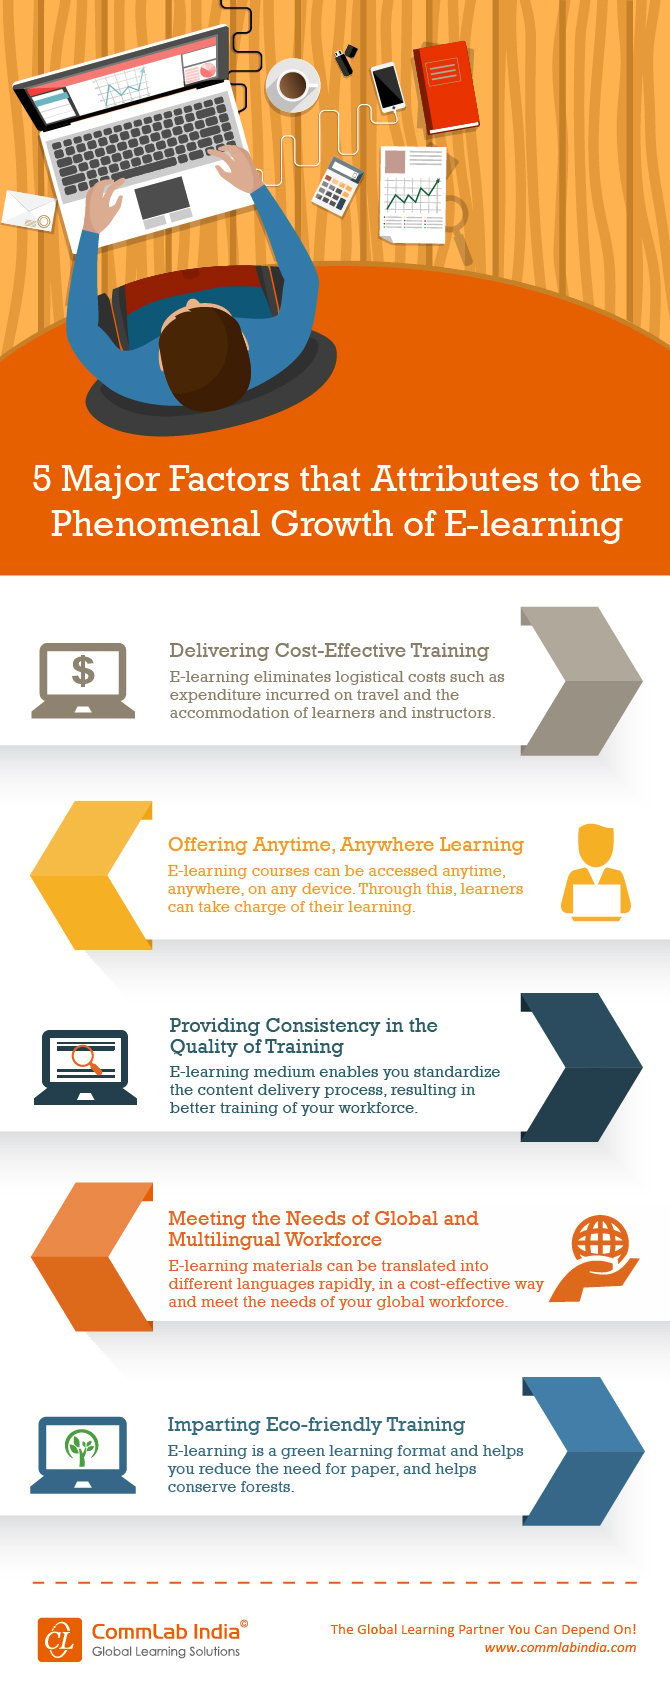 5 Major Factors that Contribute to the Phenomenal Growth of E-learning [Infographic]